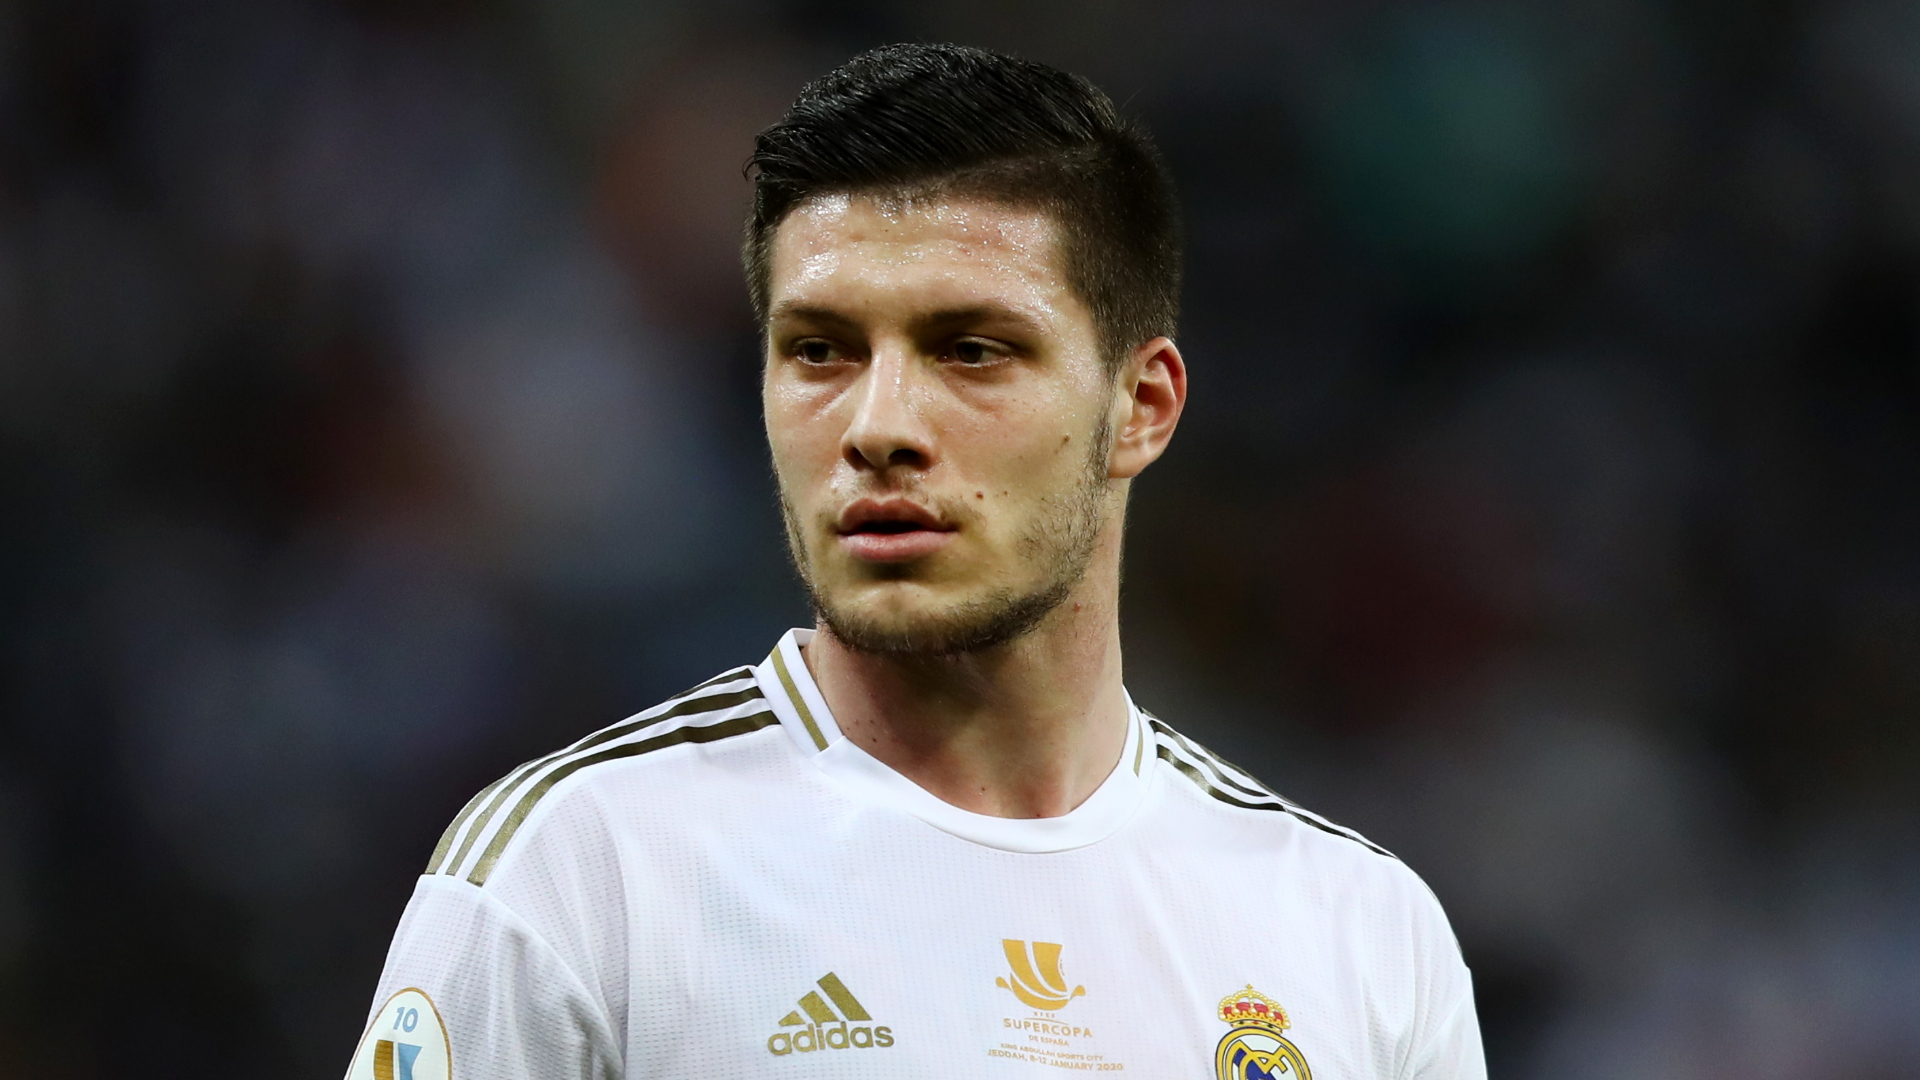 Jovic hasn't been committed to succeeding at Real Madrid - Mijatovic